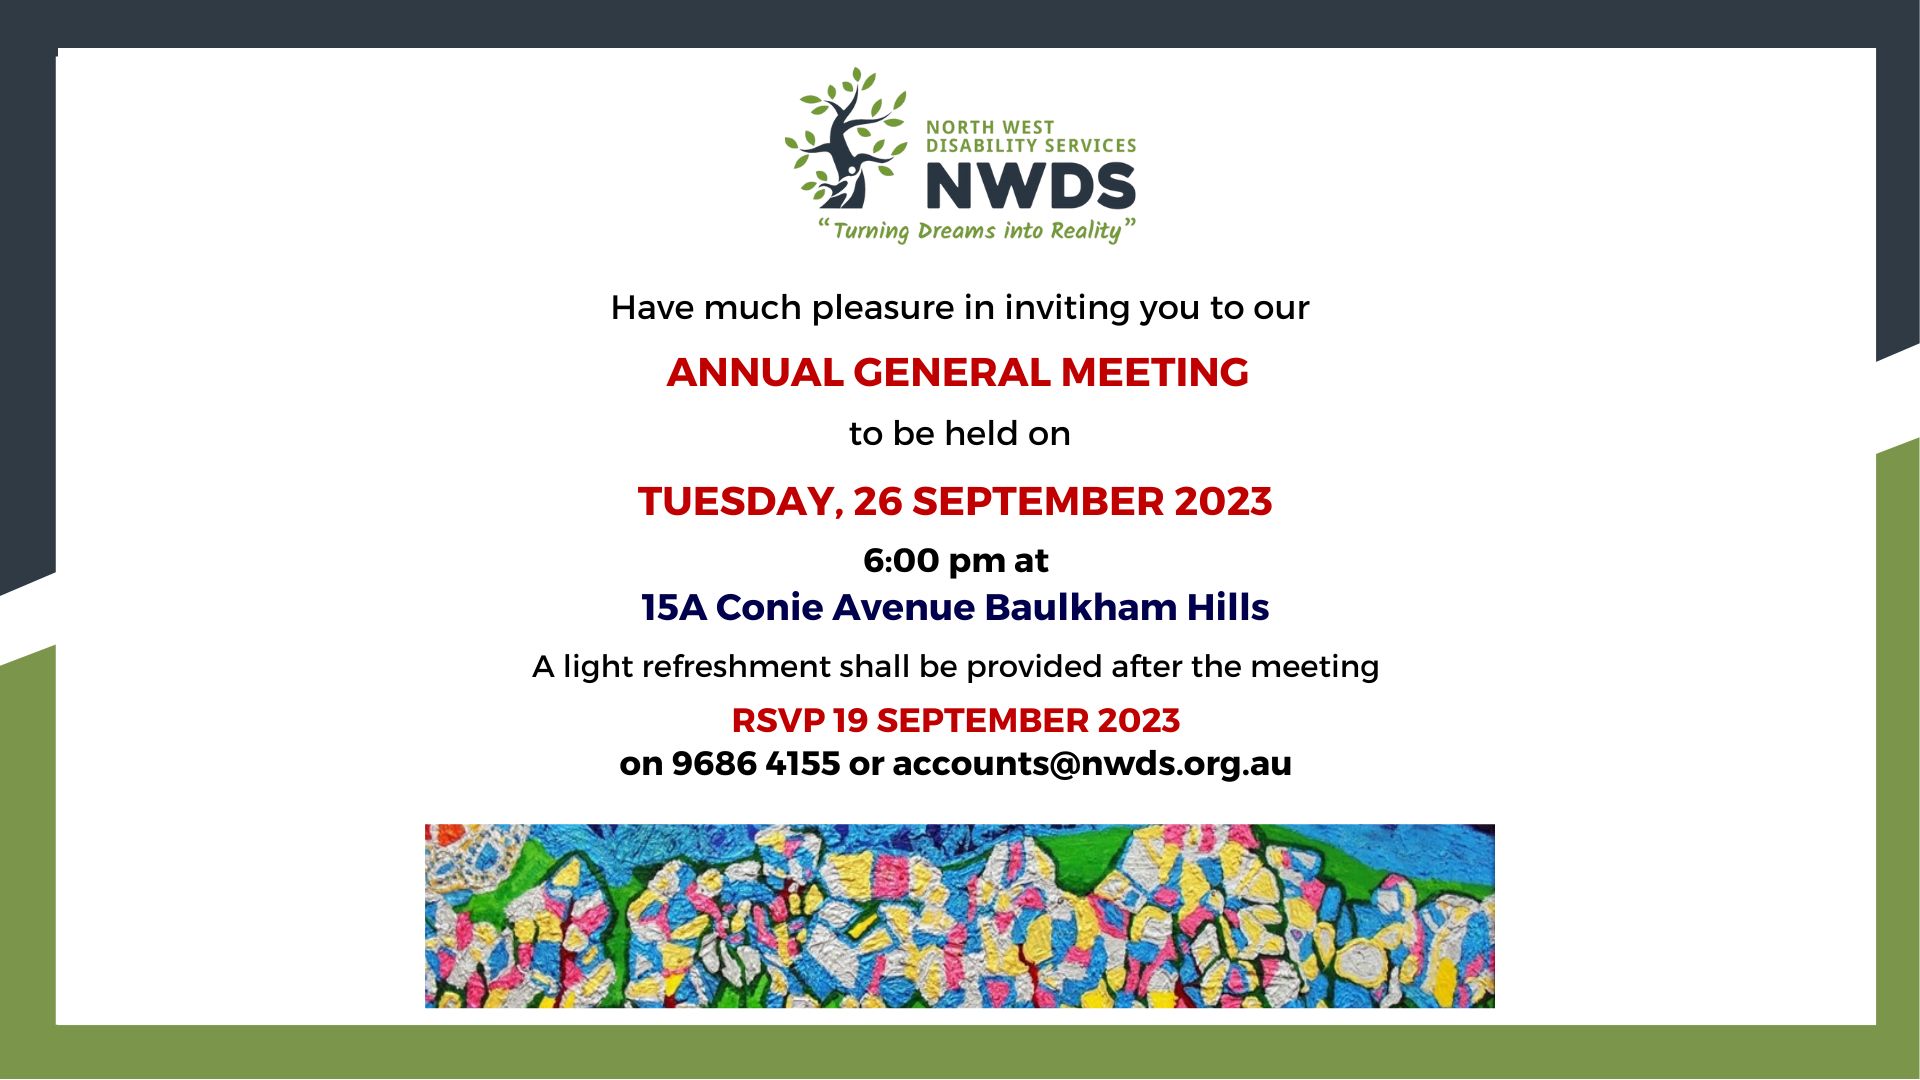 Annual General Meeting 2023 on 26 September